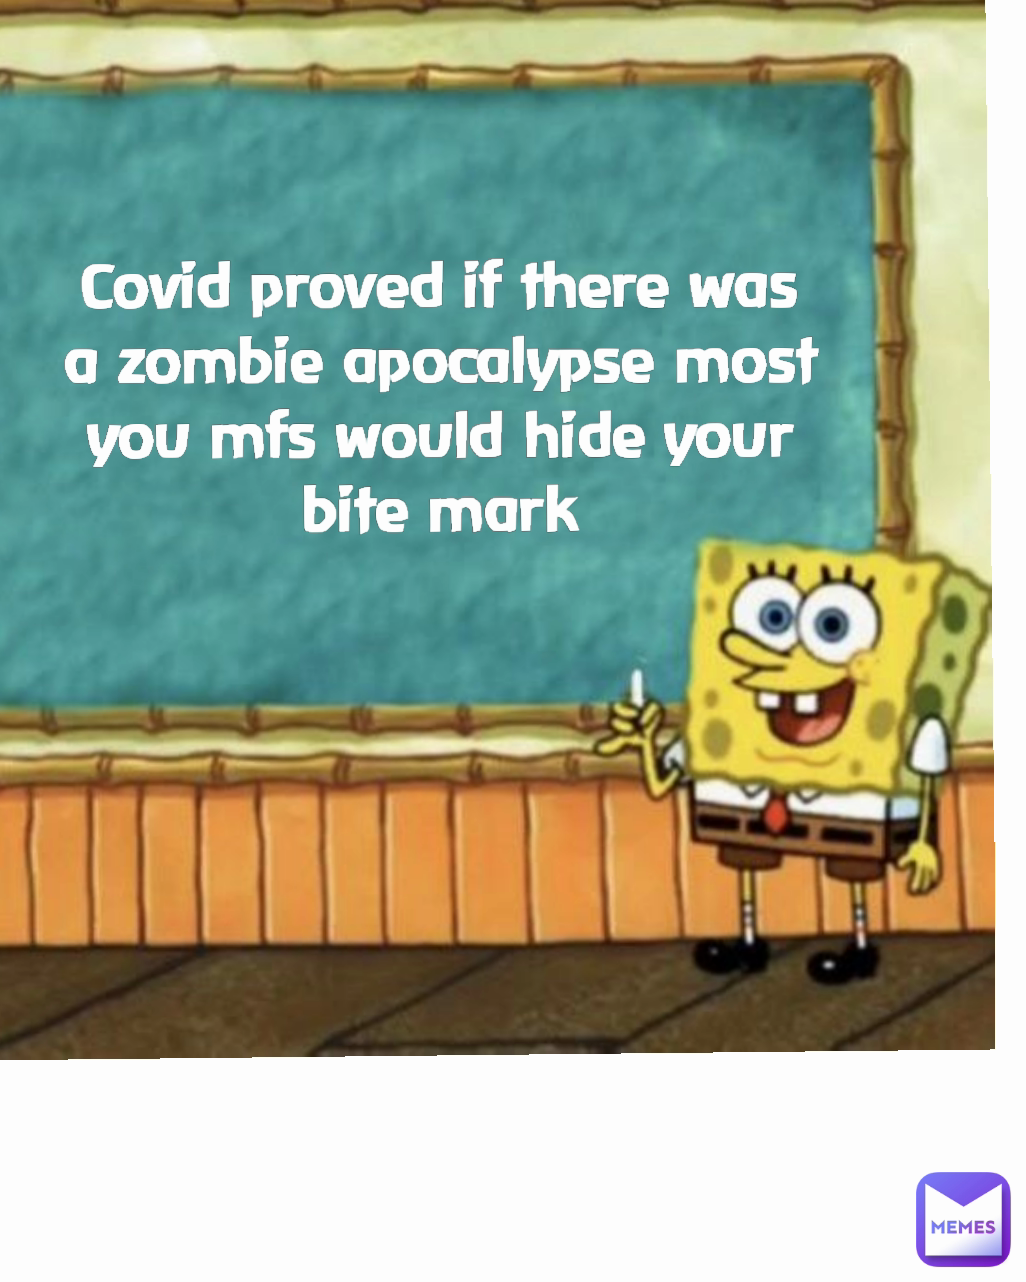 Covid proved if there was a zombie apocalypse most you mfs would hide your bite mark